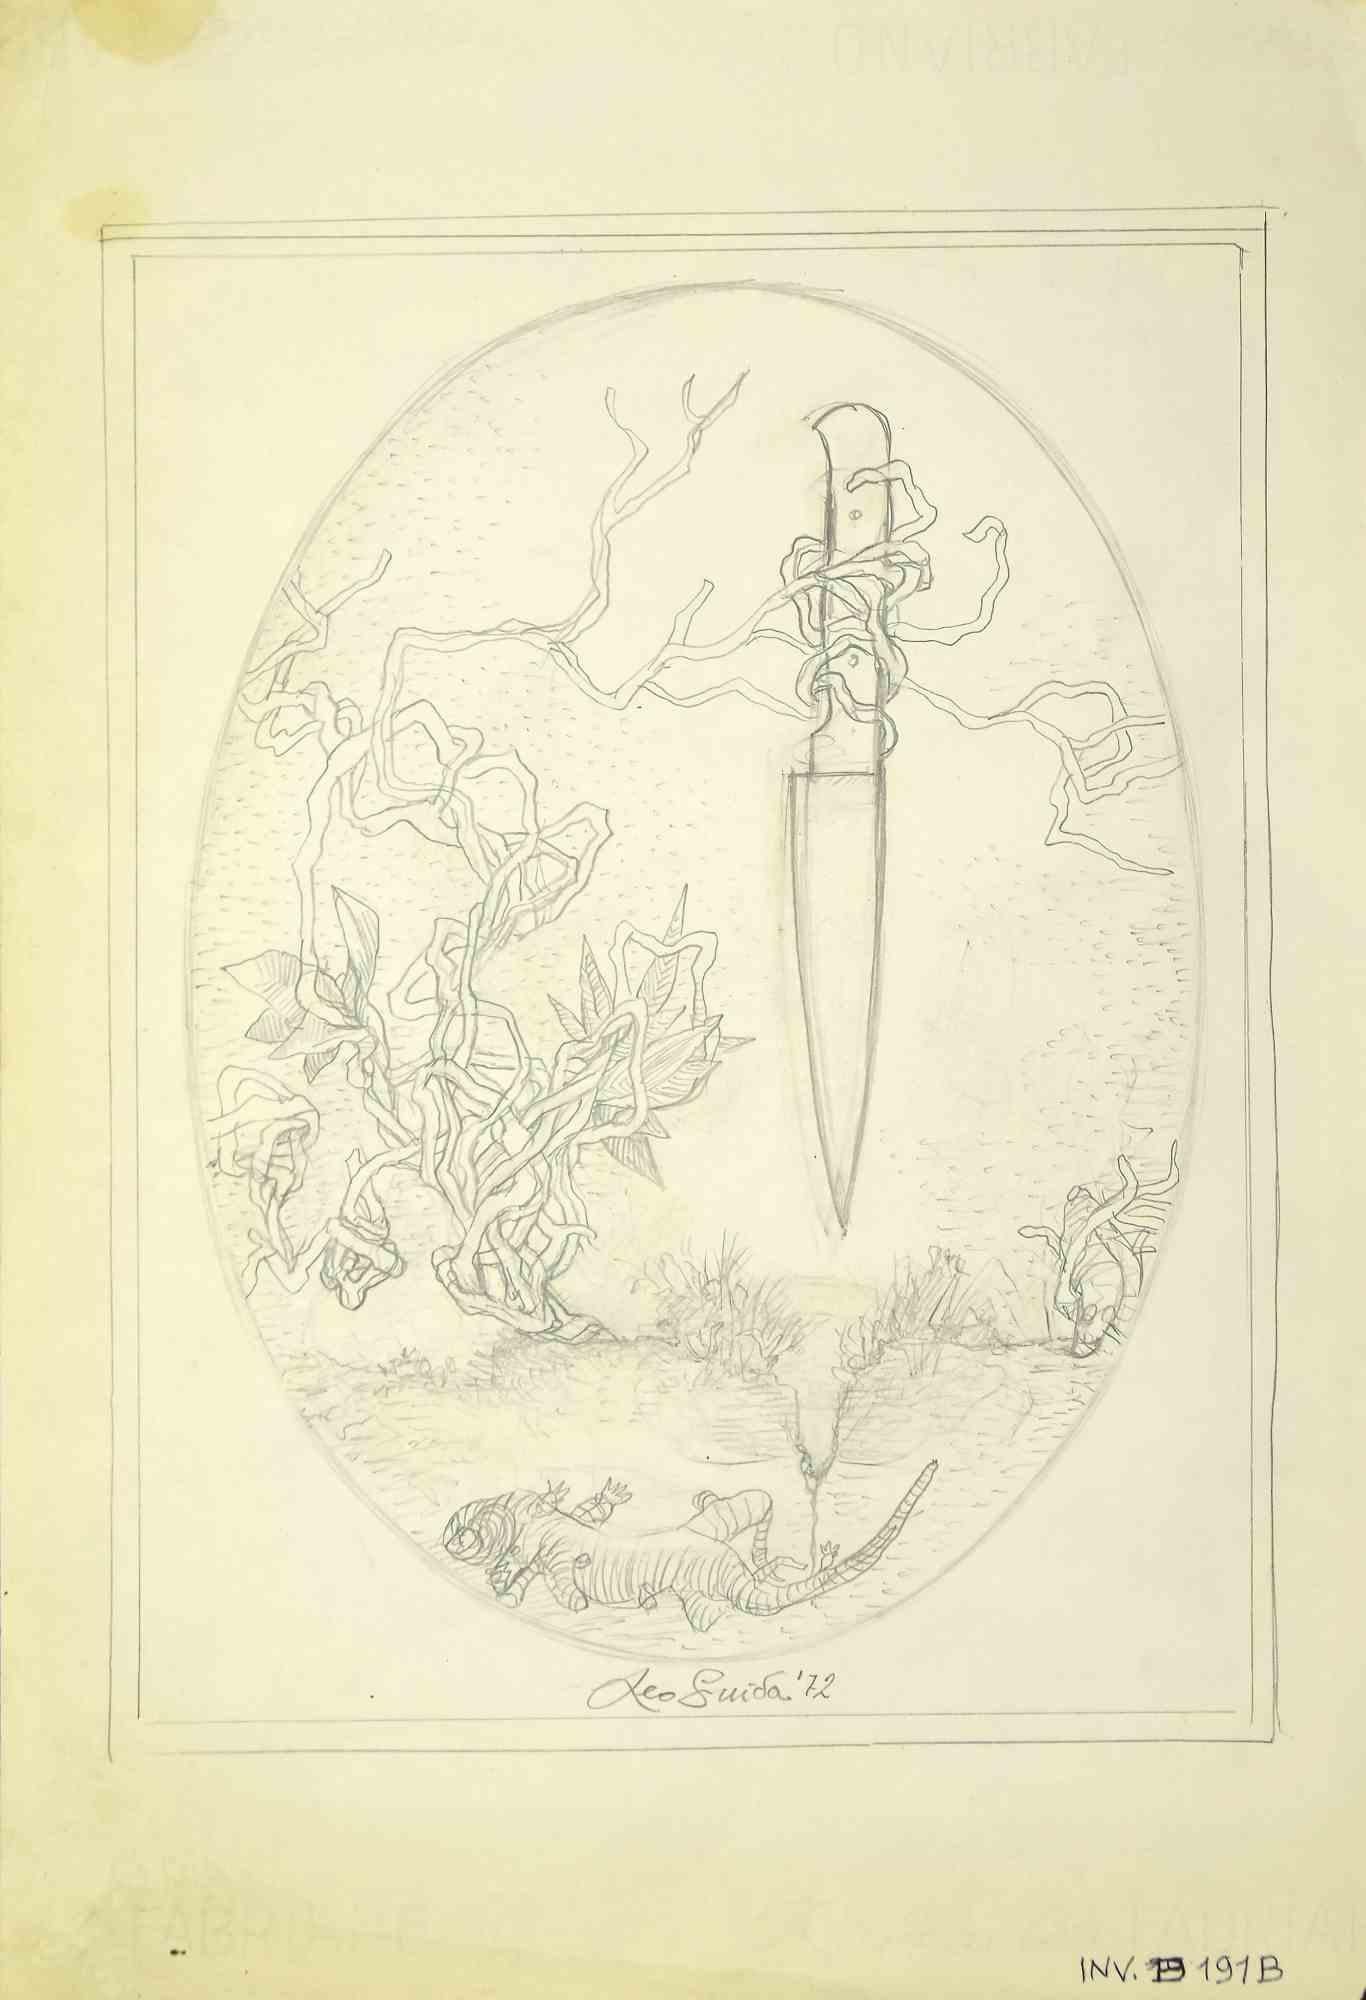 The Knife is an original drawing in pencil realized by Leo Guida in the 1972.

Good condition.

Leo Guida  (1992 - 2017). Sensitive to current issues, artistic movements and historical techniques, Leo Guida has been able to weave with many